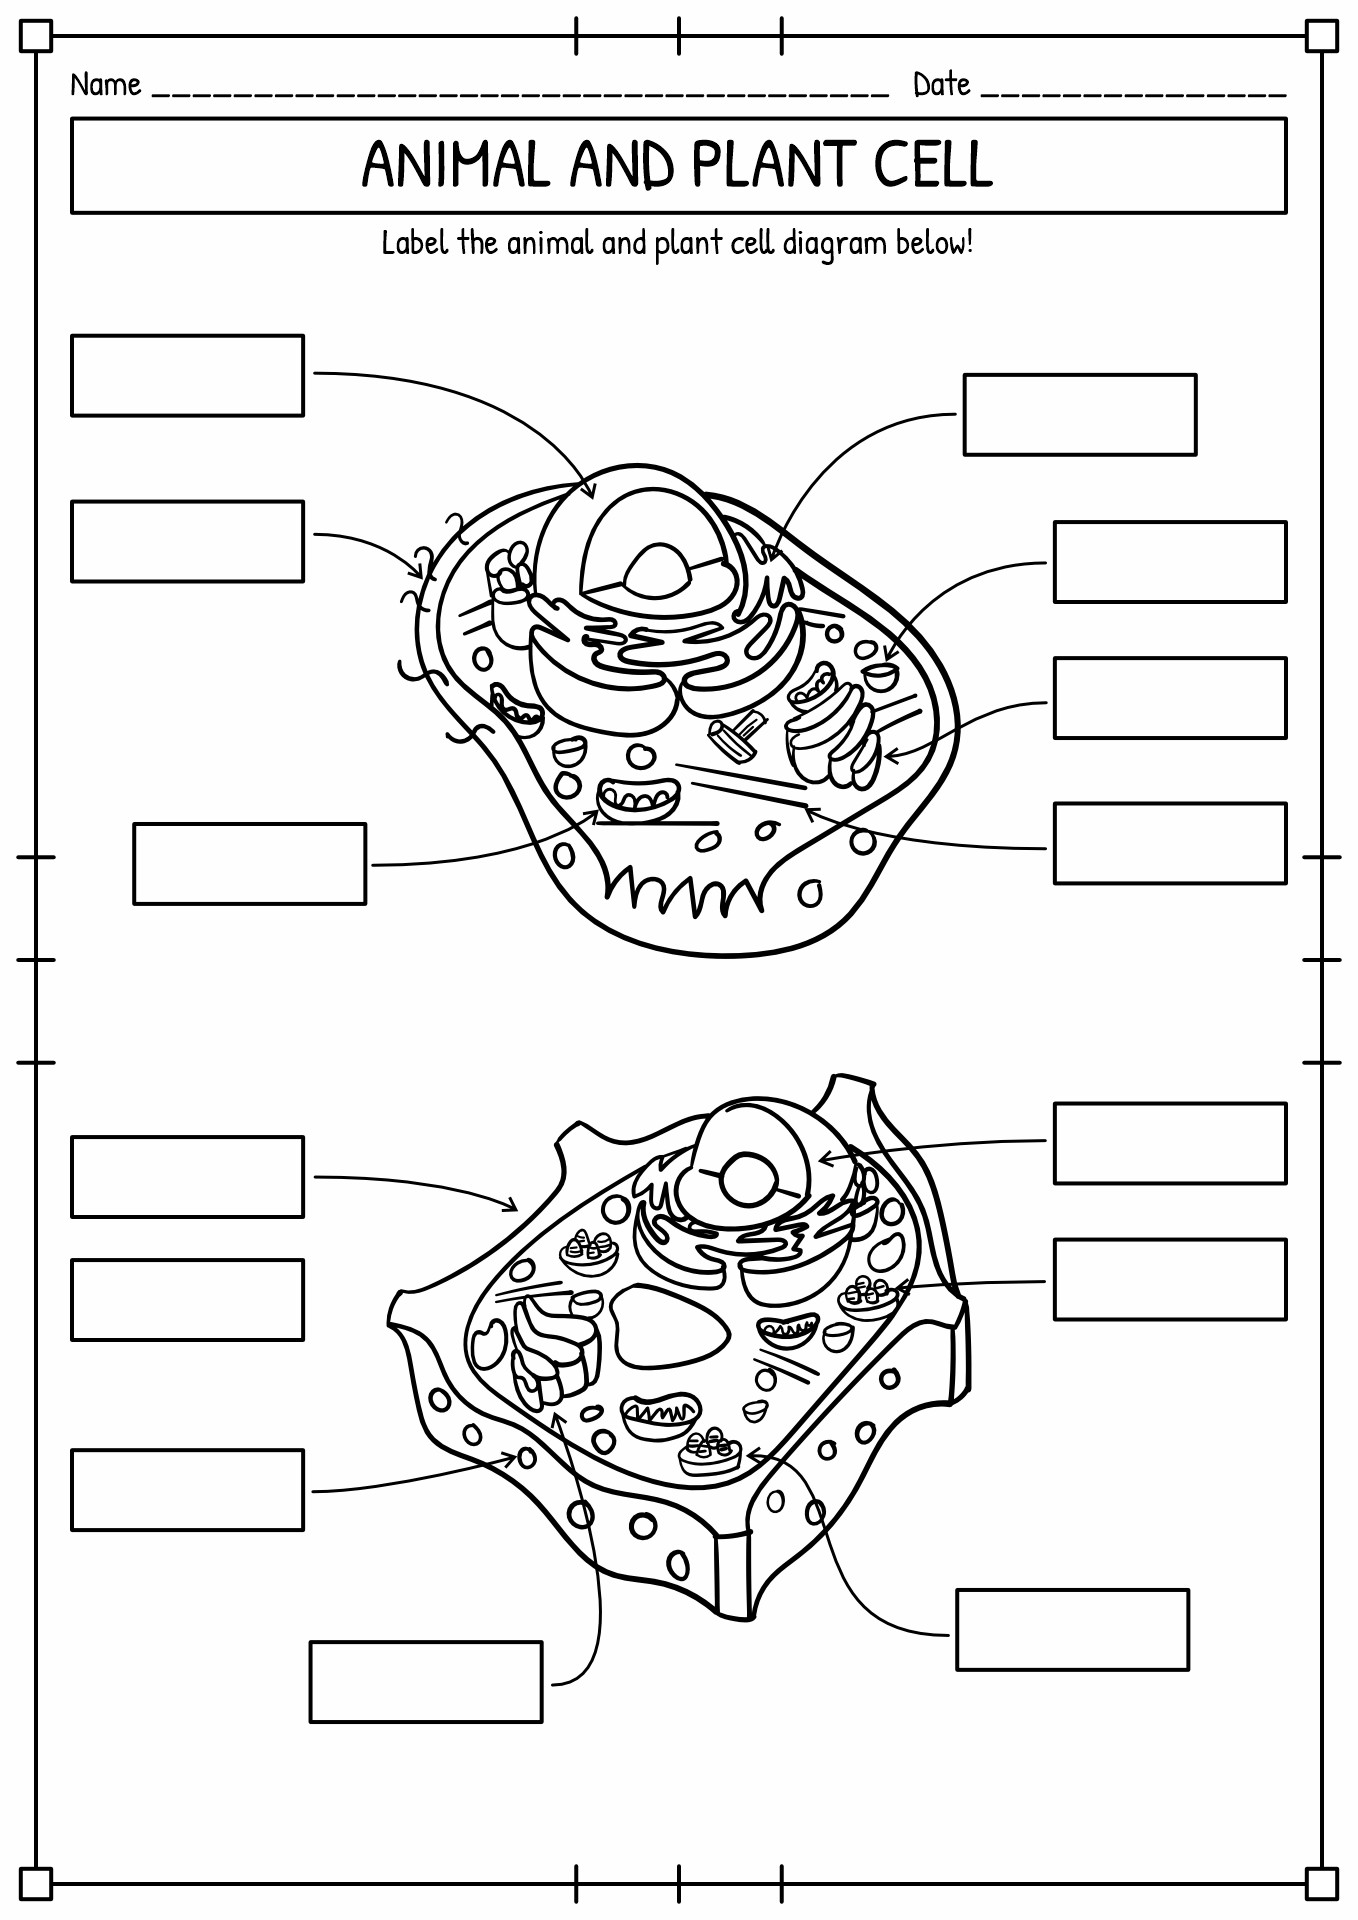 Plant and Animal Cell Organelles Worksheet Image